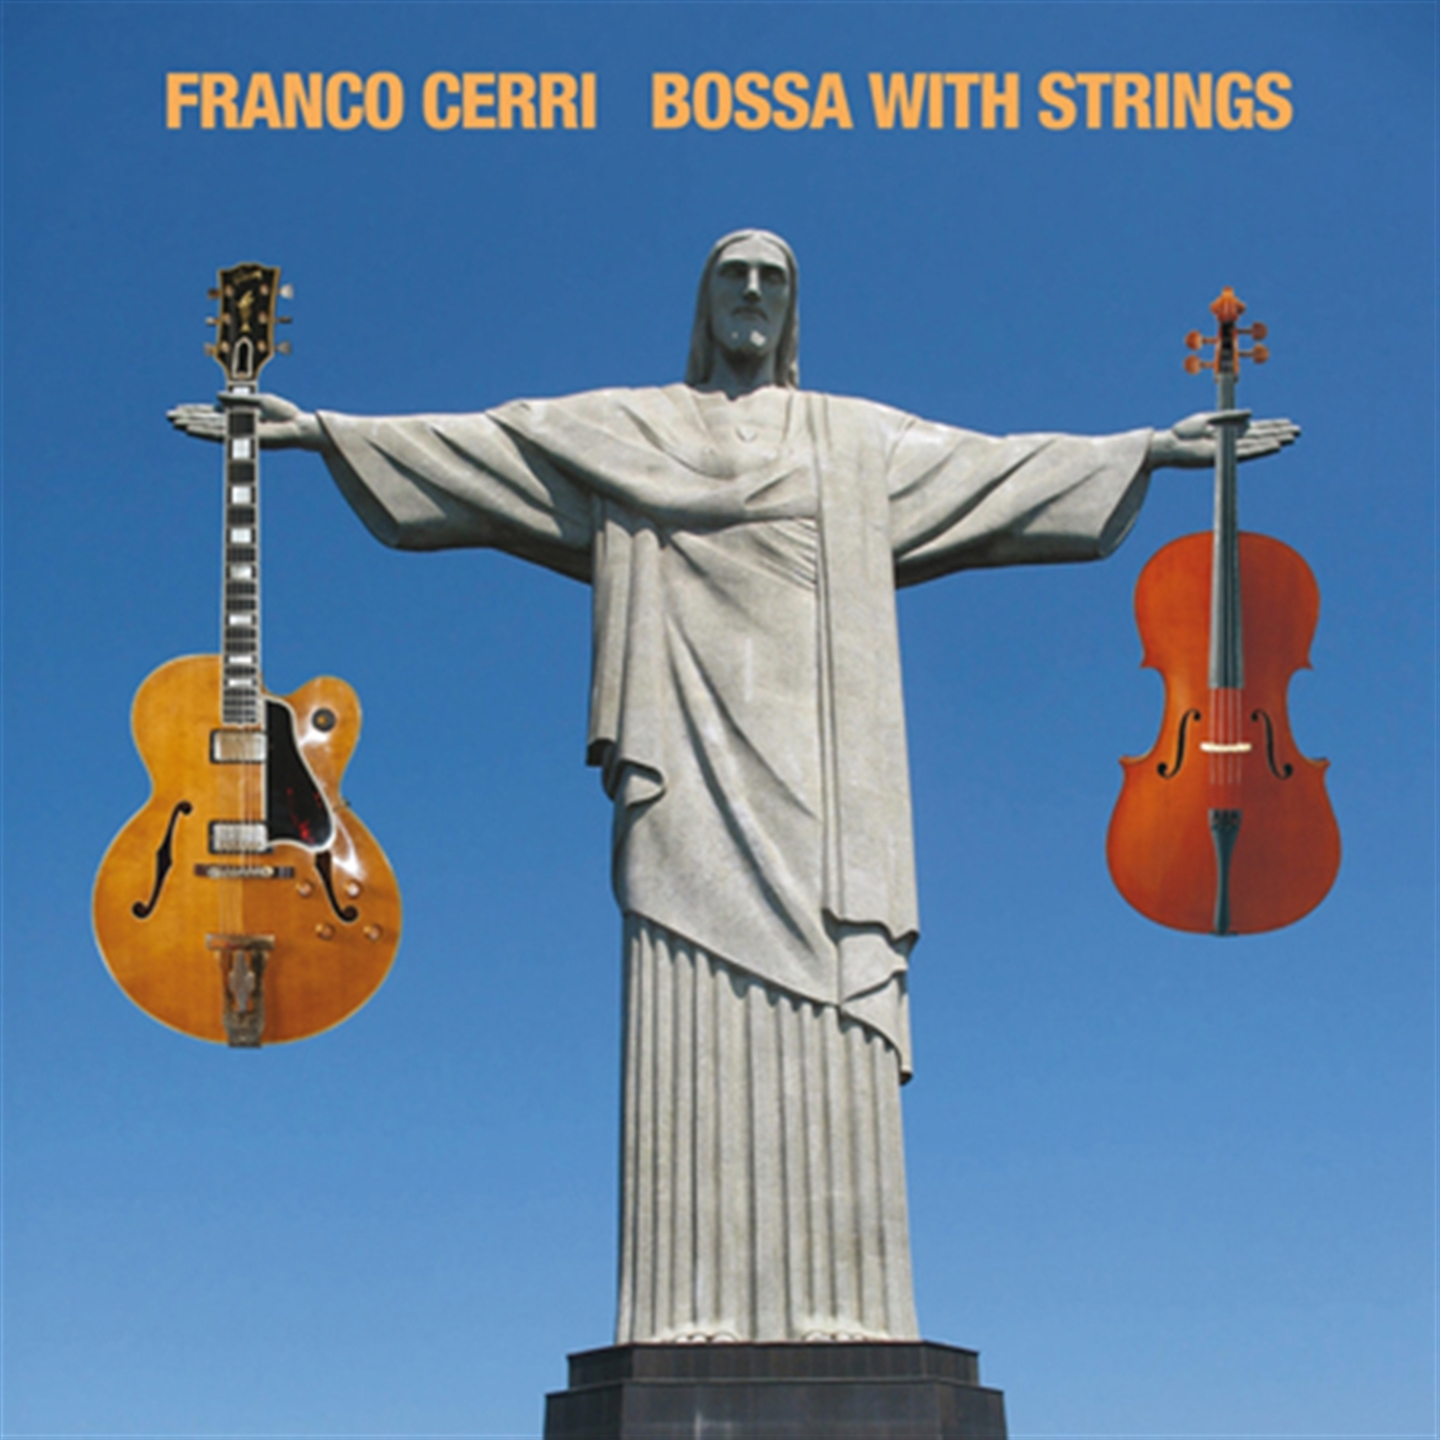 BOSSA WITH STRINGS